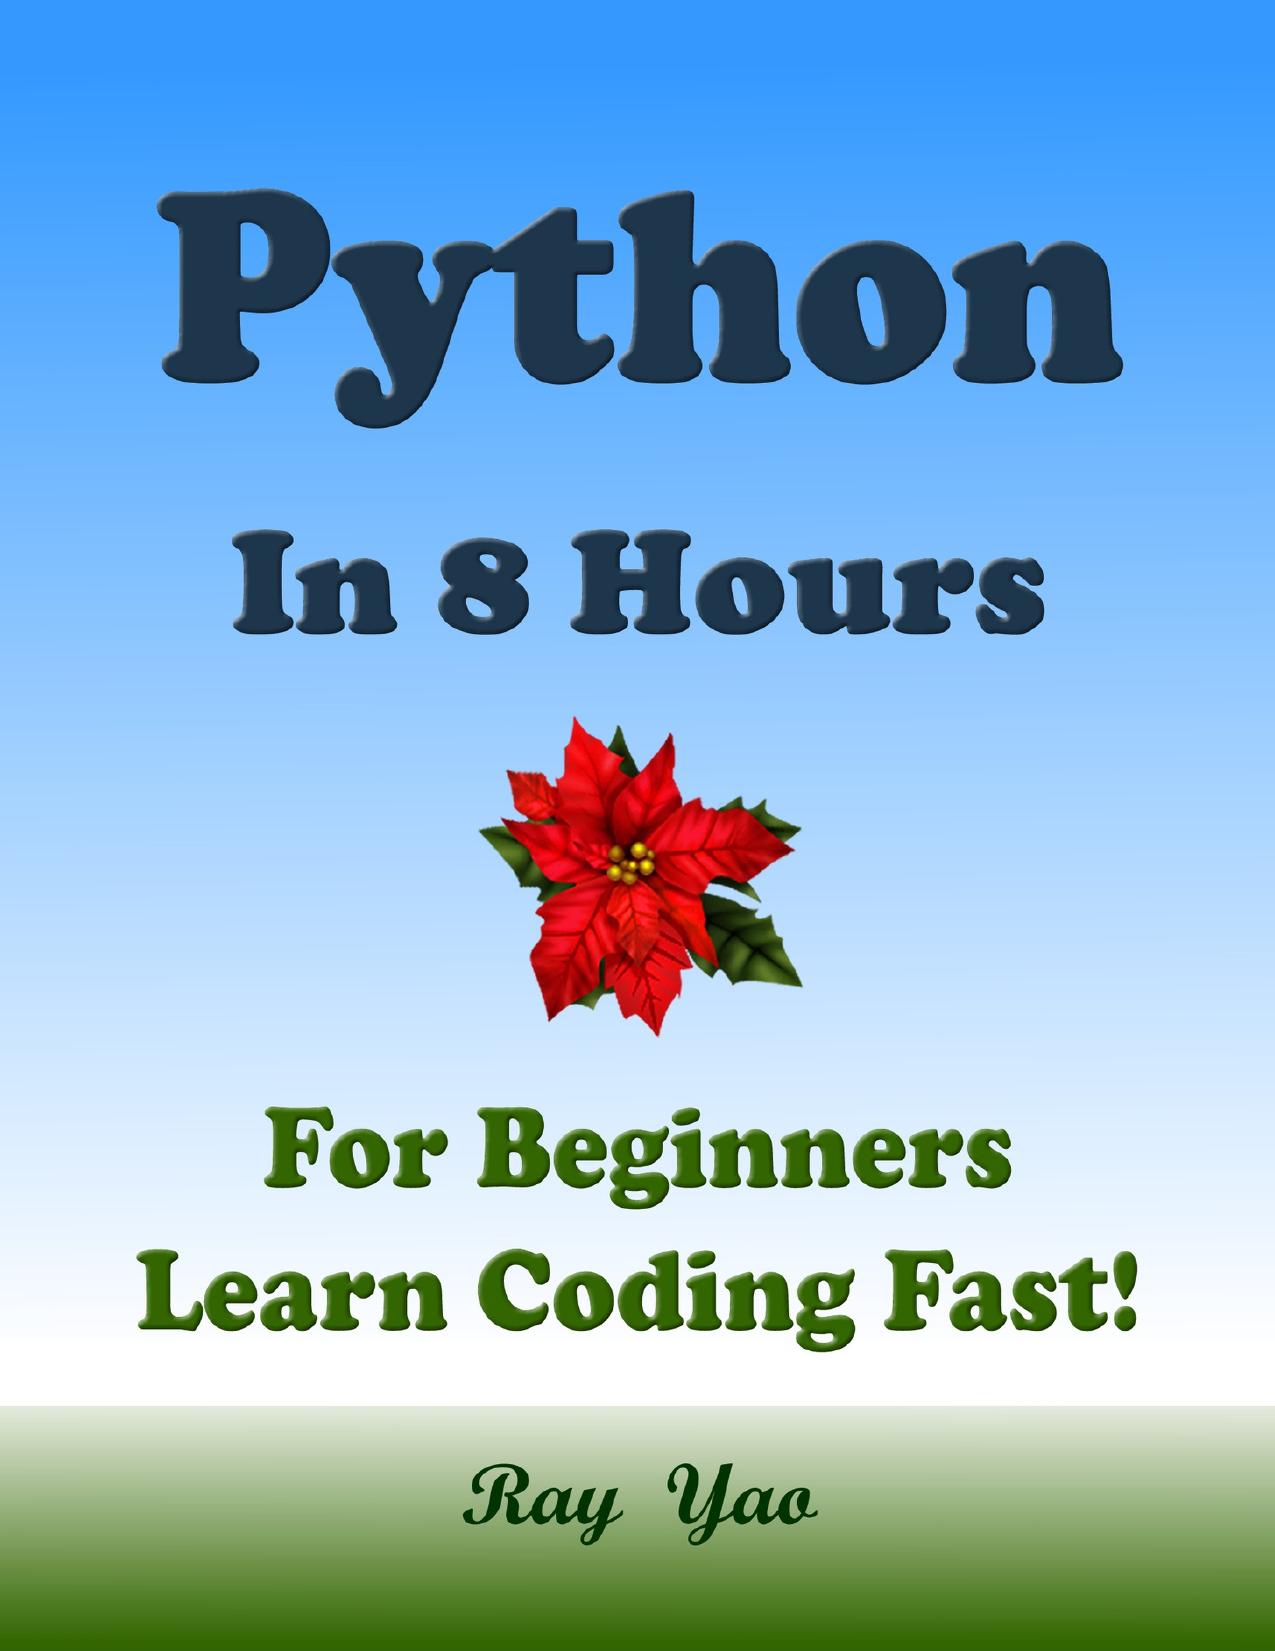 PYTHON Programming Language. In 8 Hours, For Beginners, Learn Coding Fast! Python Crash Course, A QuickStart eBook, Tutorial Book with Hands-On Projects, In Easy Steps! An Ultimate Beginner's Guide! by Yao Ray